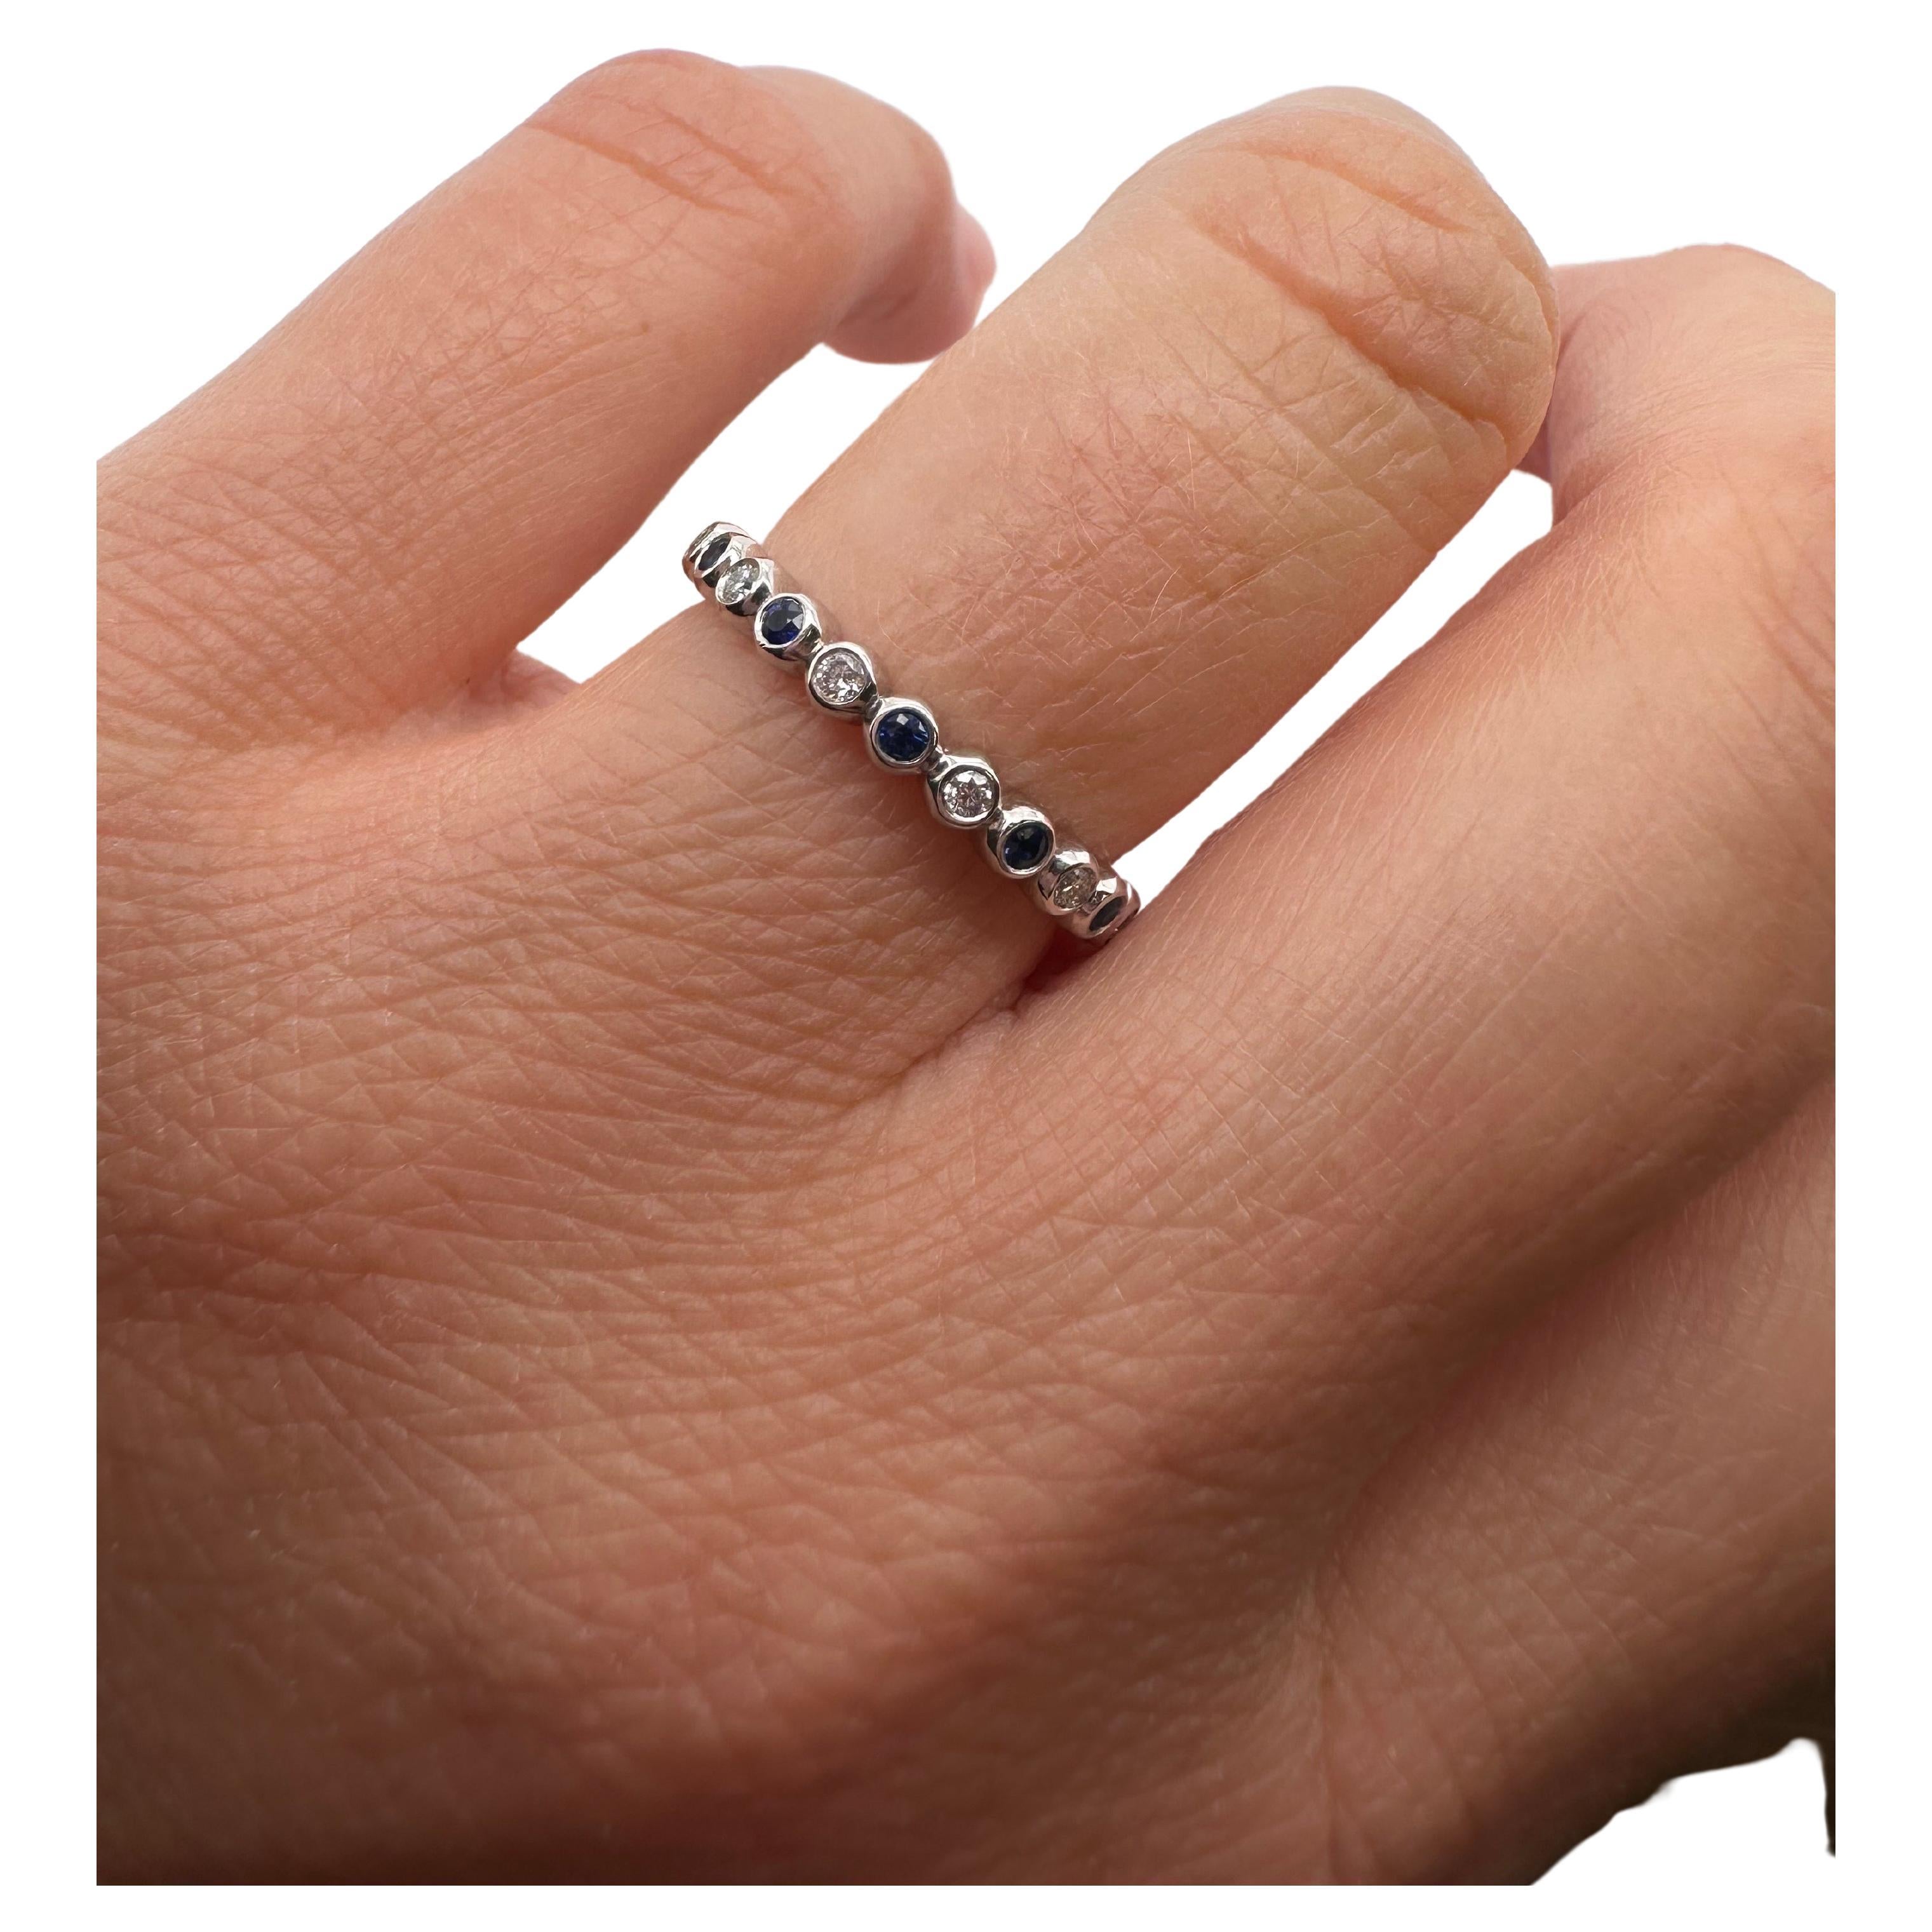 Blue sapphire and diamond ring in 14KT white gold, eternity ring bezel set.

Metal Type: 14KT
Gram Weight:4 grams 

Natural Sapphire(s):
Color: Dark Blue
Cut:Round
Carat: 0.30ct
Clarity: Moderately Included

Natural Diamond(s): 
Color: F-G
Cut:Round